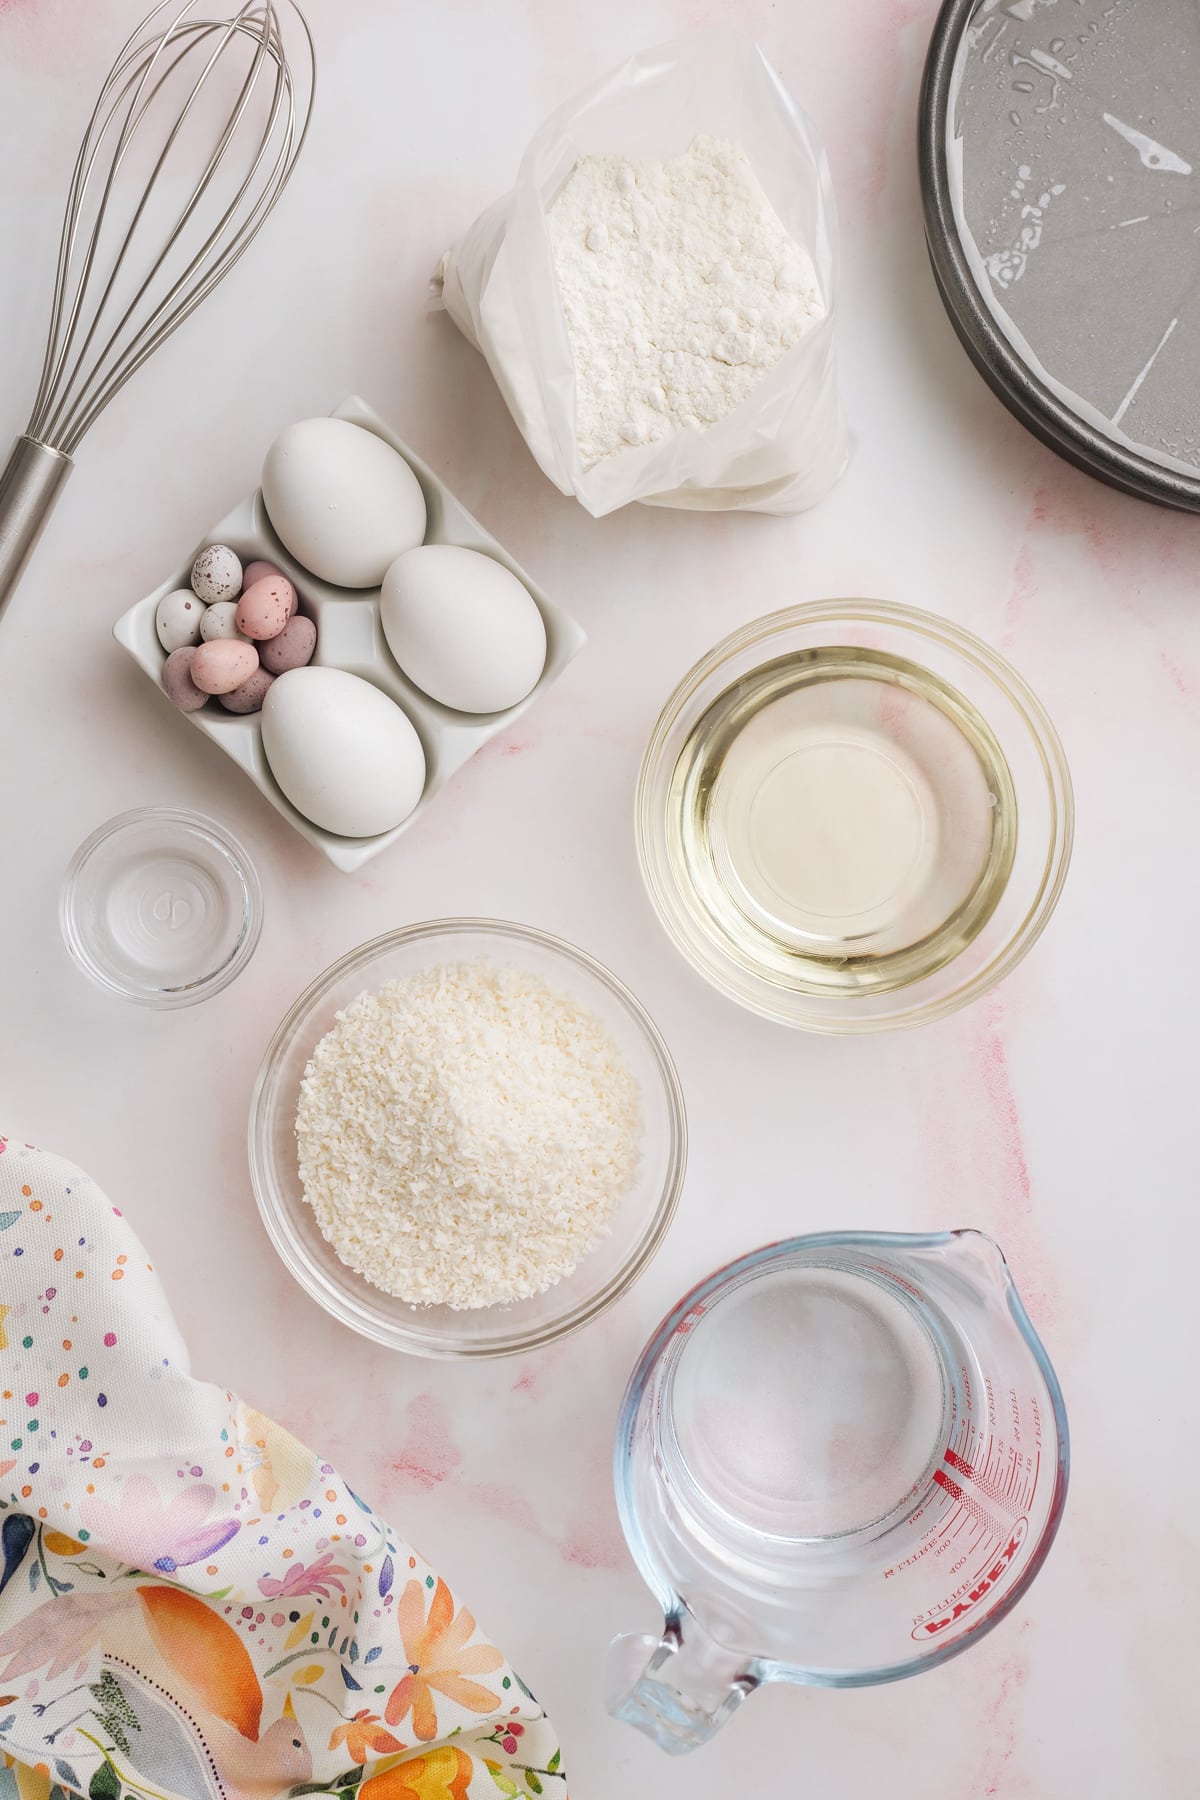 Ingredients for Easter bunny cake